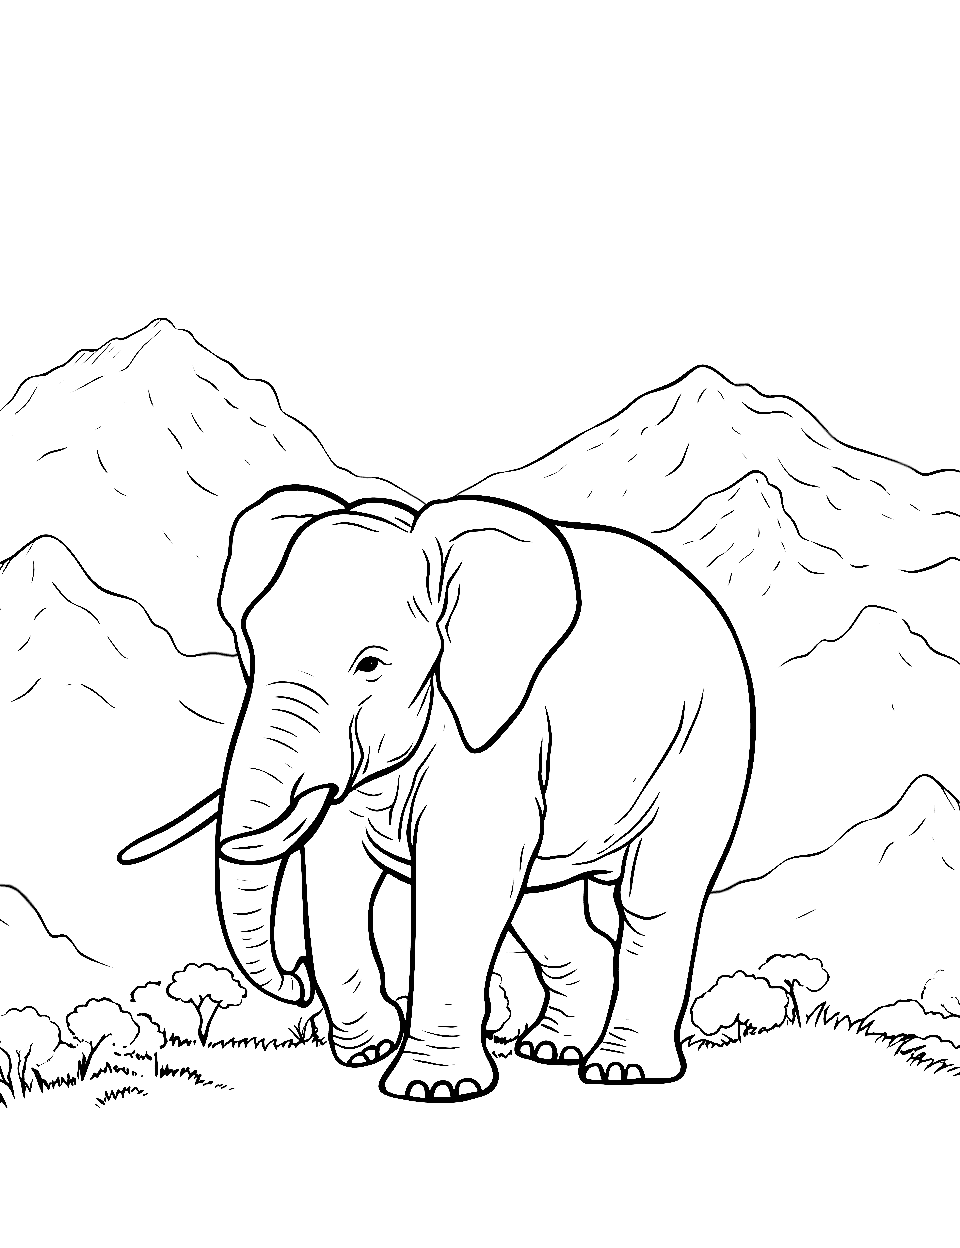 Elephant Mountain Backdrop Coloring Page - An elephant with towering mountains in the distance.